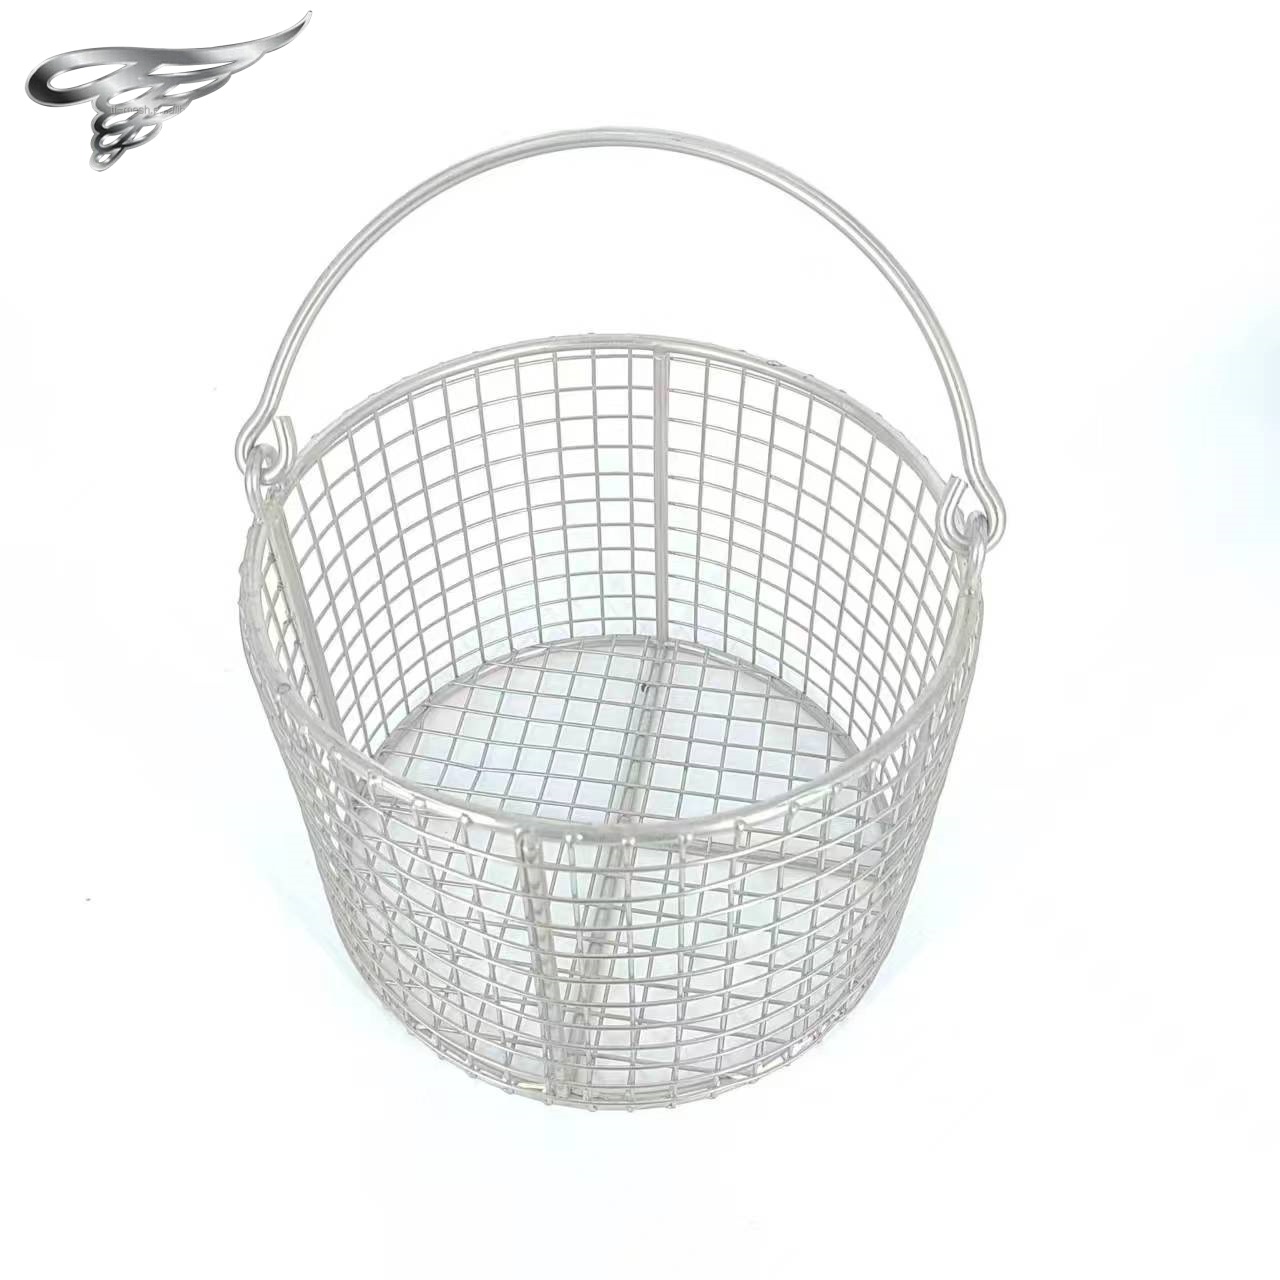 Launch of Eco-Friendly Stainless Steel Disinfection Basket Marks a New Era in Sanitation